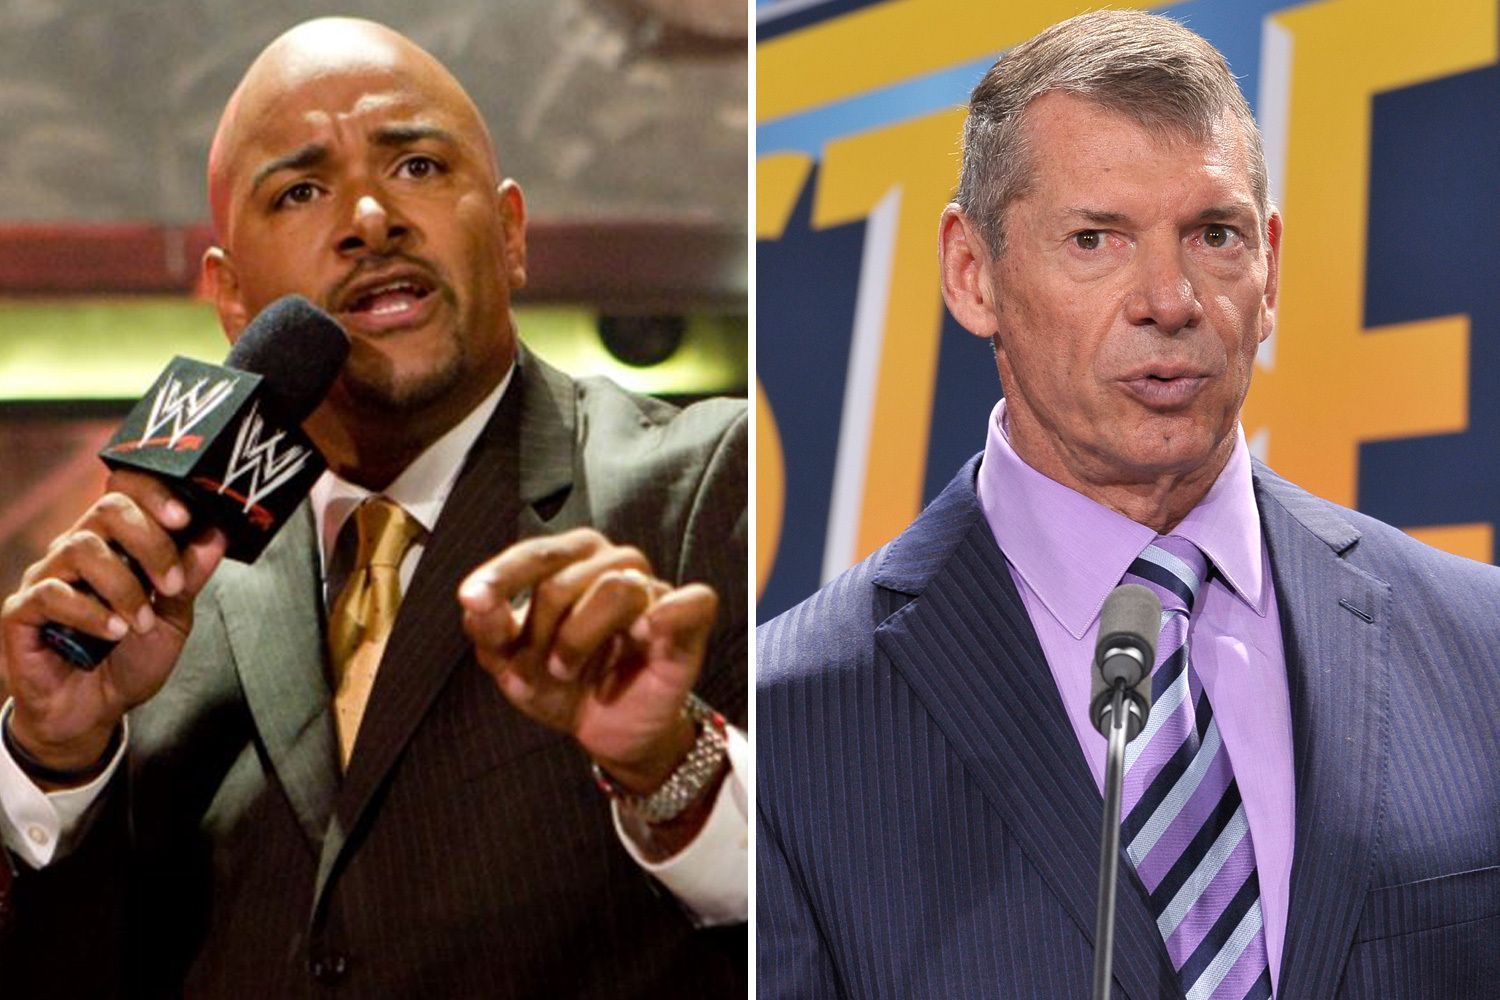 Vince McMahon and Jonathan Coachman were terrific villains on screen, but behind the scenes, Vince had the last laugh on &quot;The Coach&quot; in this unforgettable rib.